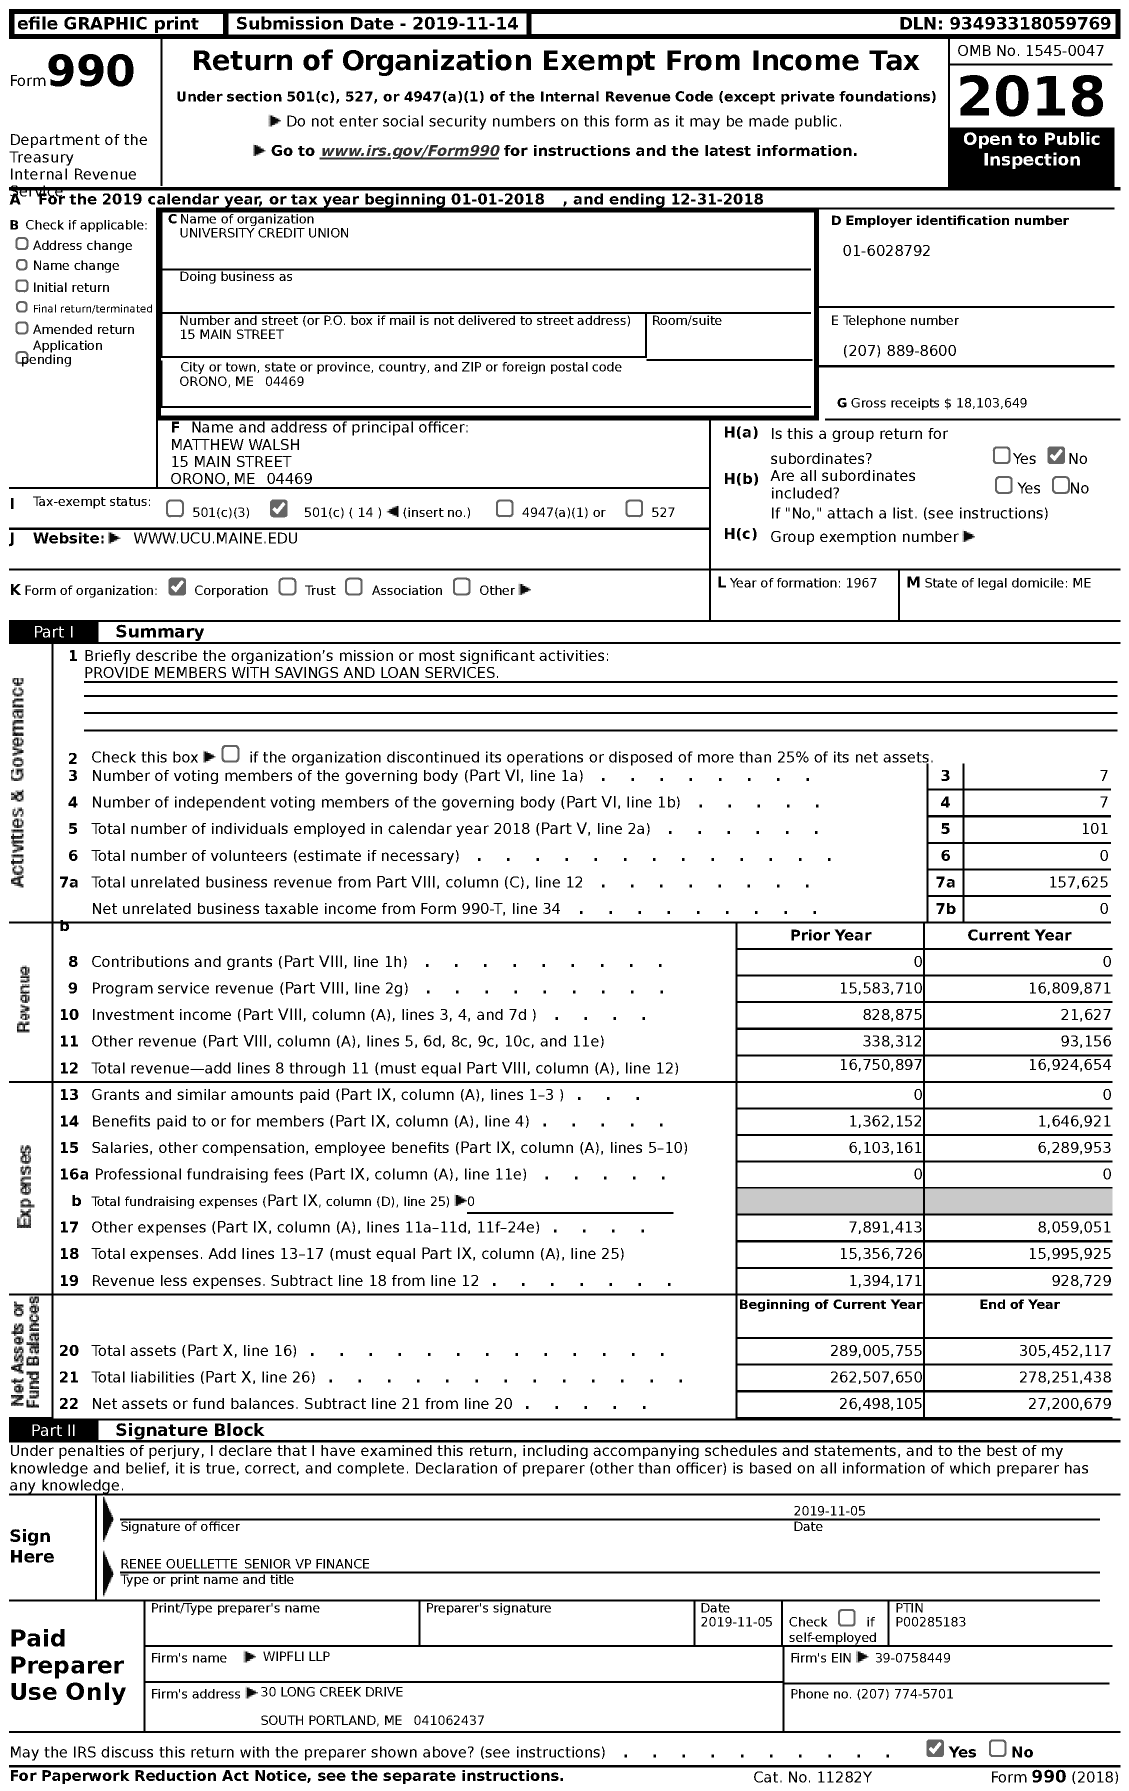 Image of first page of 2018 Form 990 for University Credit Union (UCU)